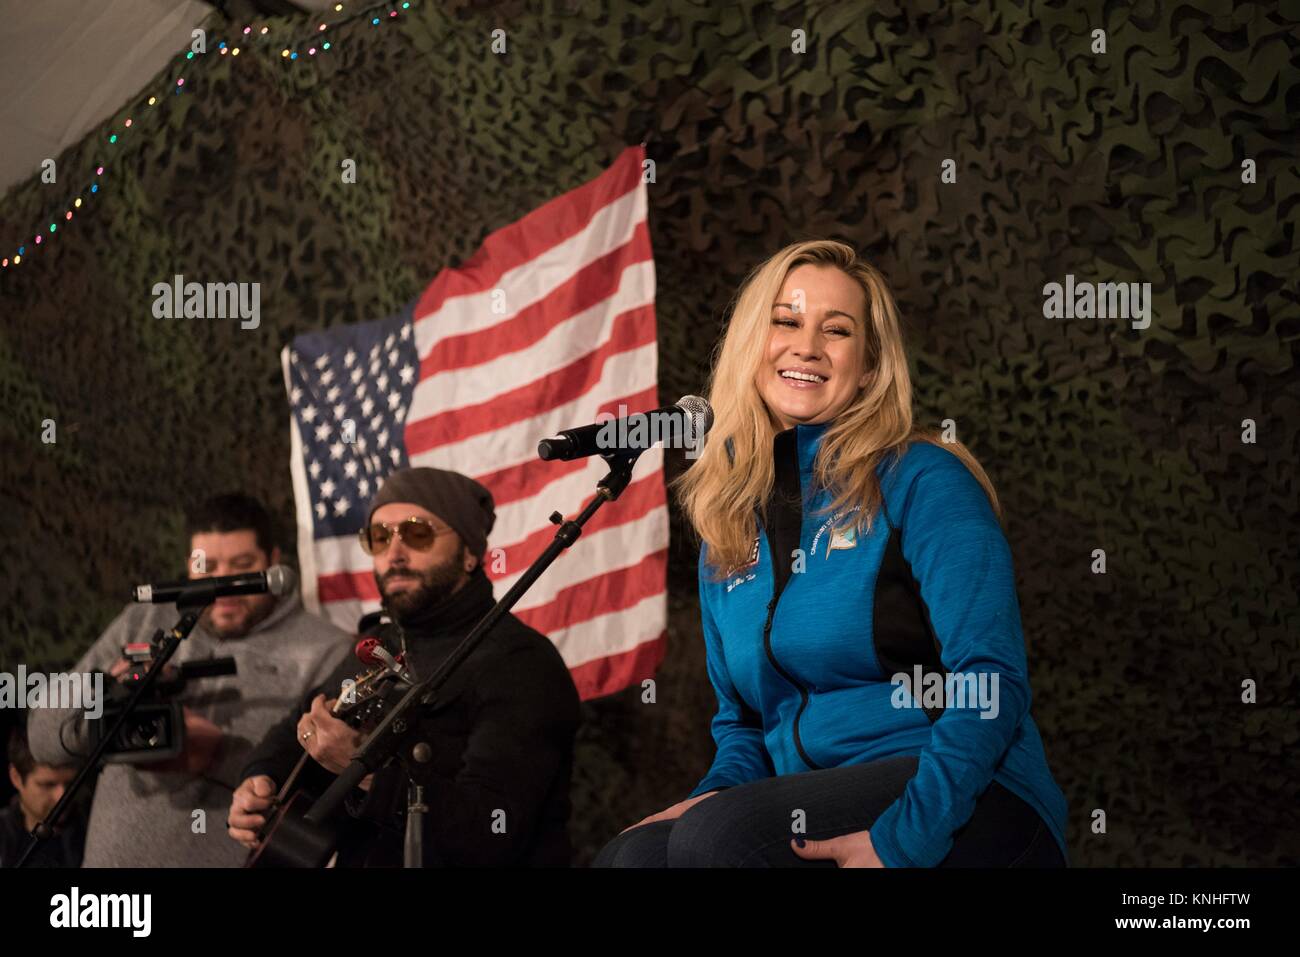 Guitarist Dave Baker and country music singer Kellie Pickler perform for U.S. troops during the CJCS USO Holiday Tour December 25, 2016 in Iraq. (photo by PO2 Dominique A. Pineiro  via Planetpix) Stock Photo